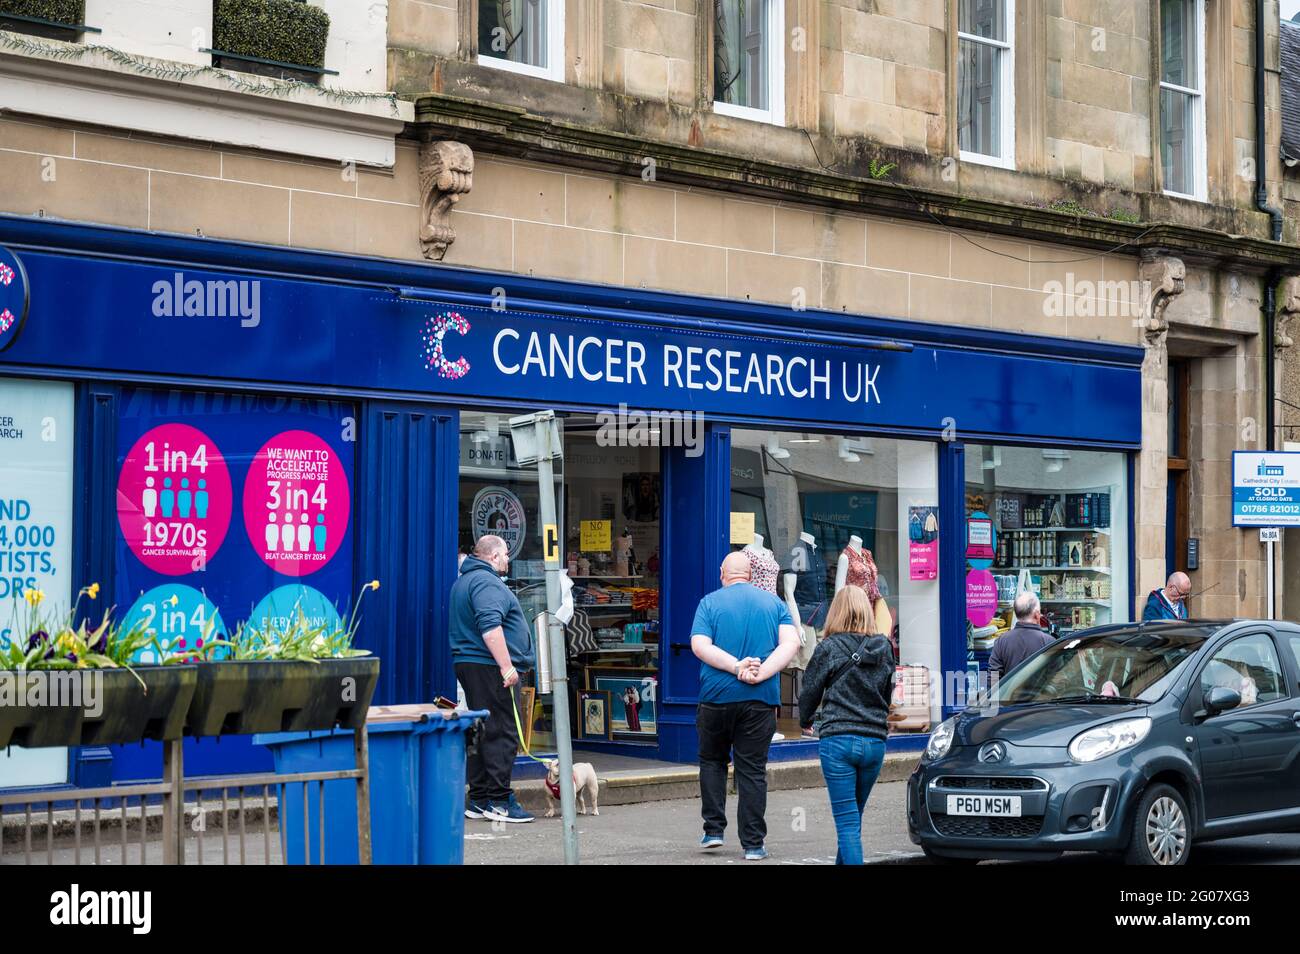 Callander, Scotland- May 29, 2021: The store front and sign for Cancer Research UK Stock Photo